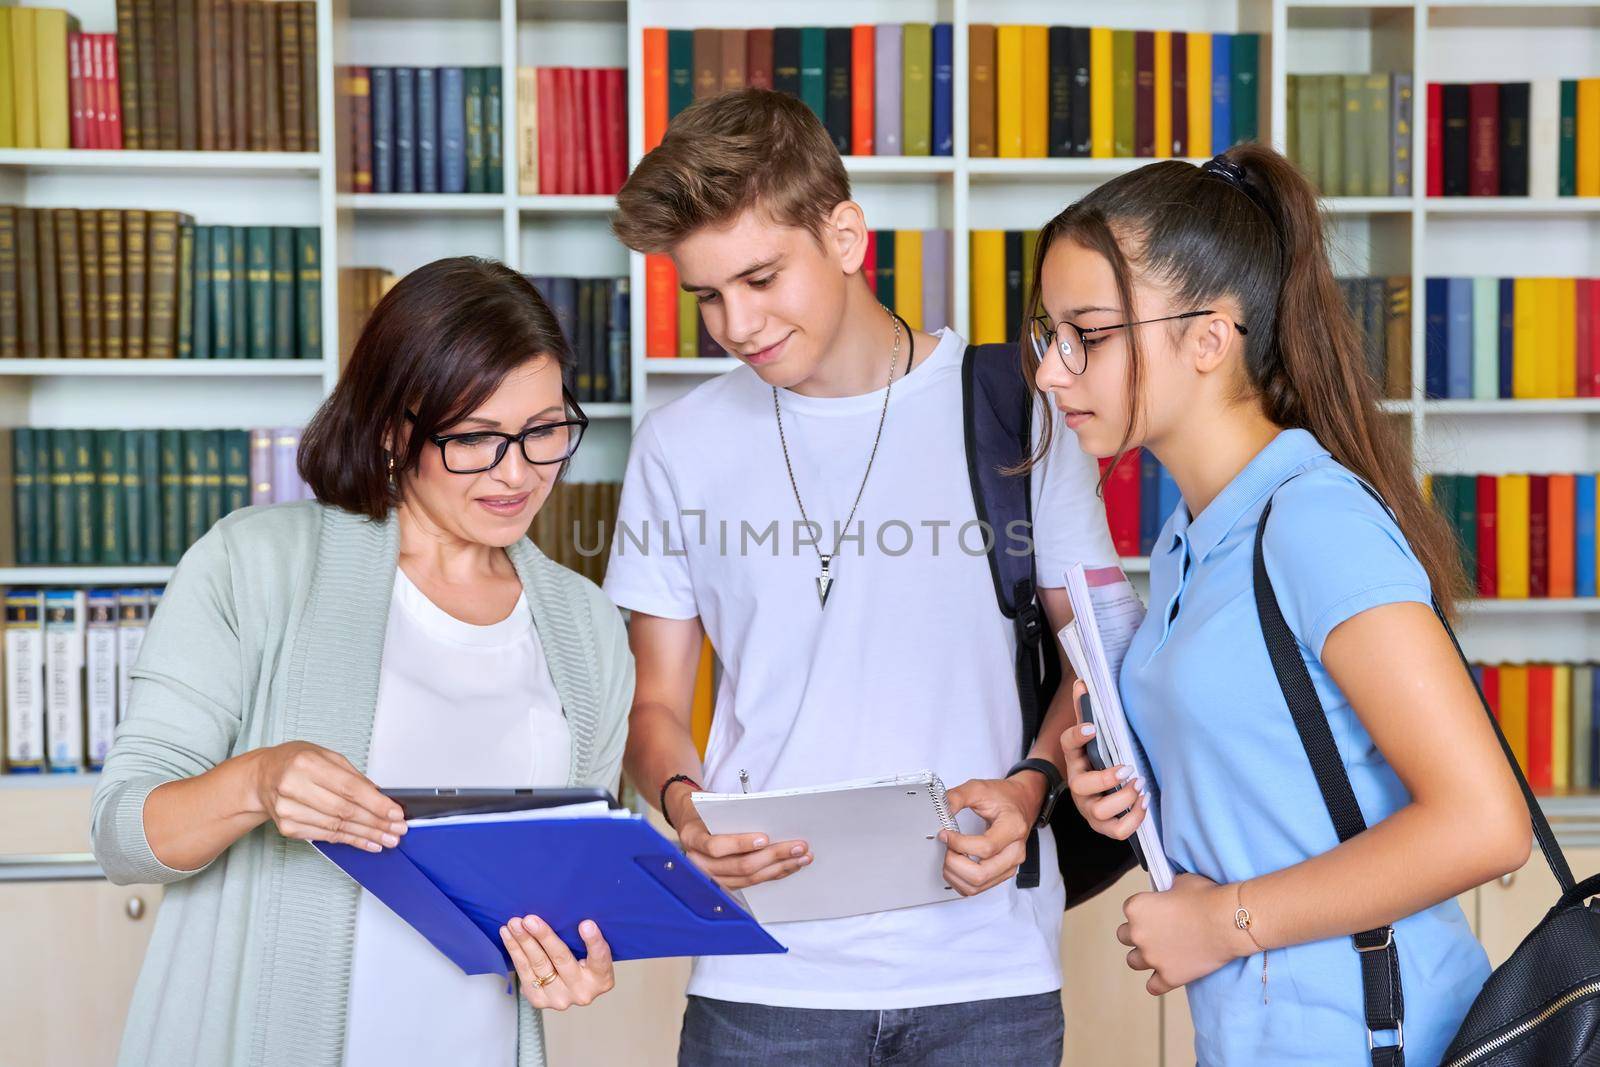 Students teenagers talking with woman teacher mentor, library shelving with books background. High school, education, knowledge, adolescence concept